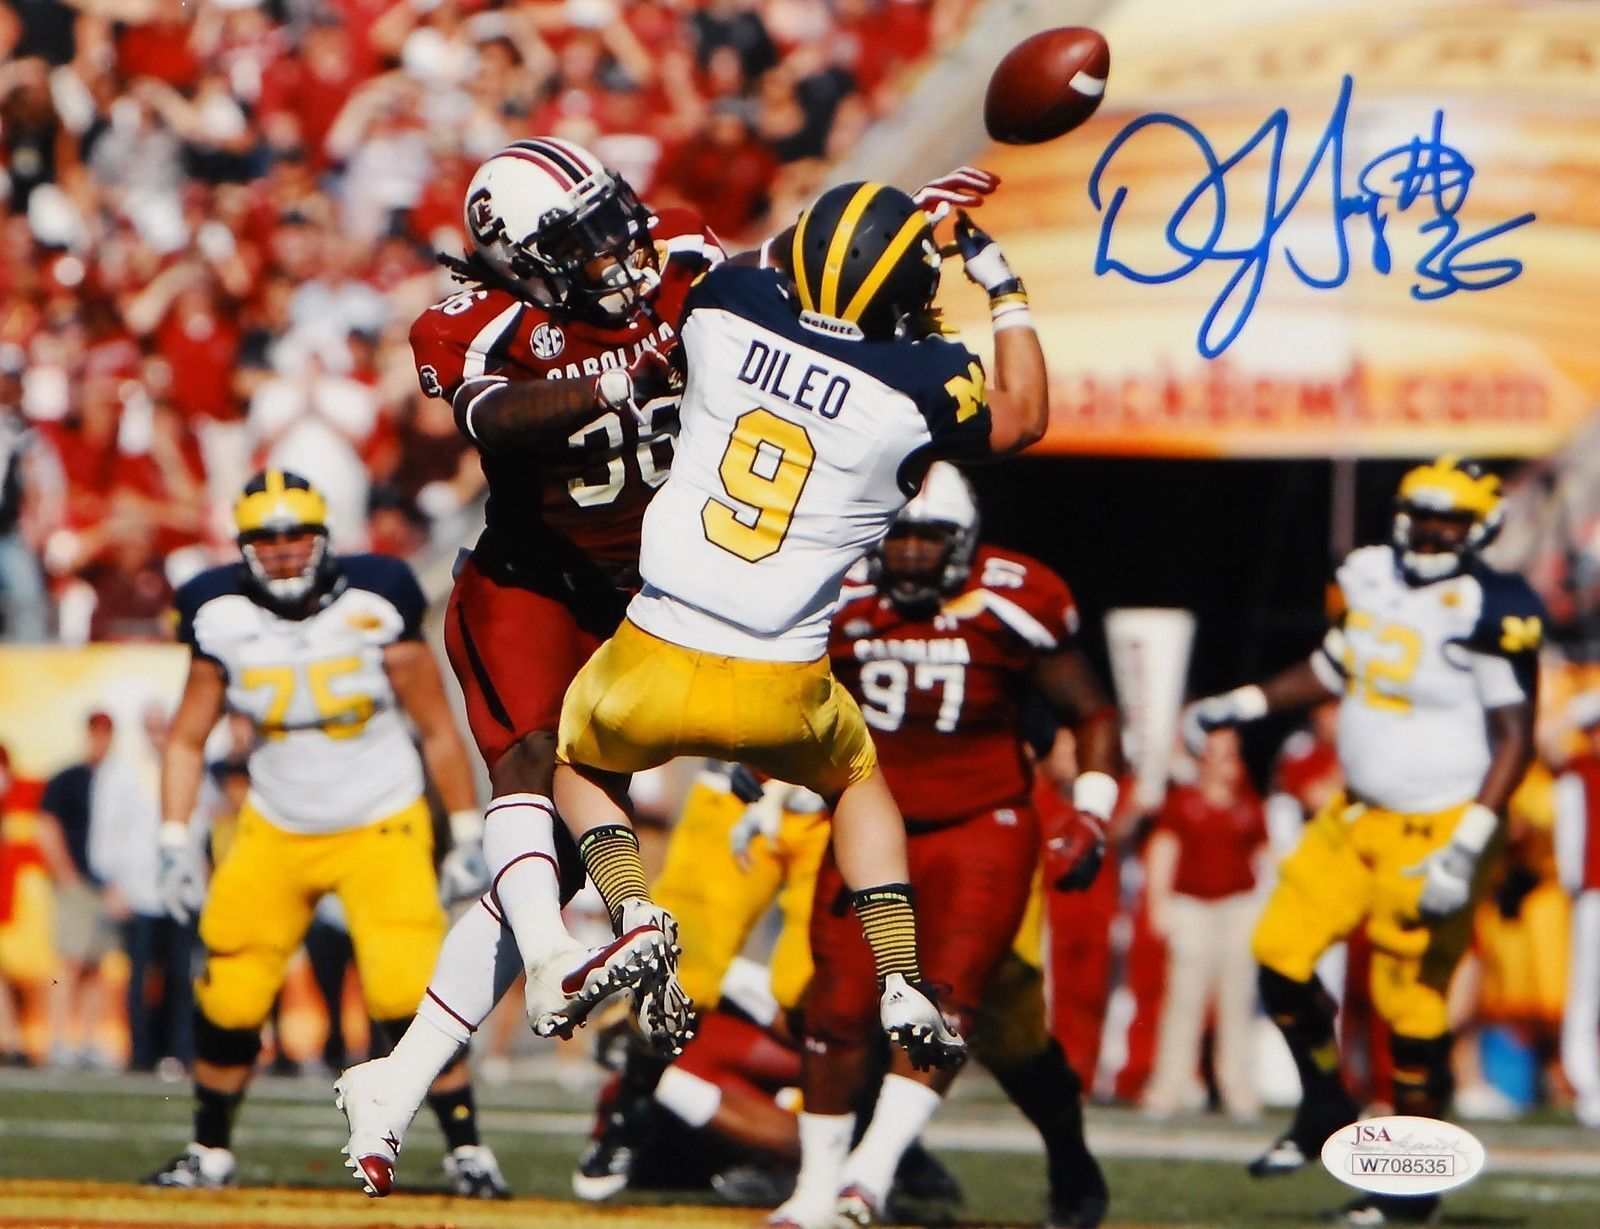 D.J. Swearinger Autographed South Carolina 8x10 Photo Poster painting- JSA Authenticated